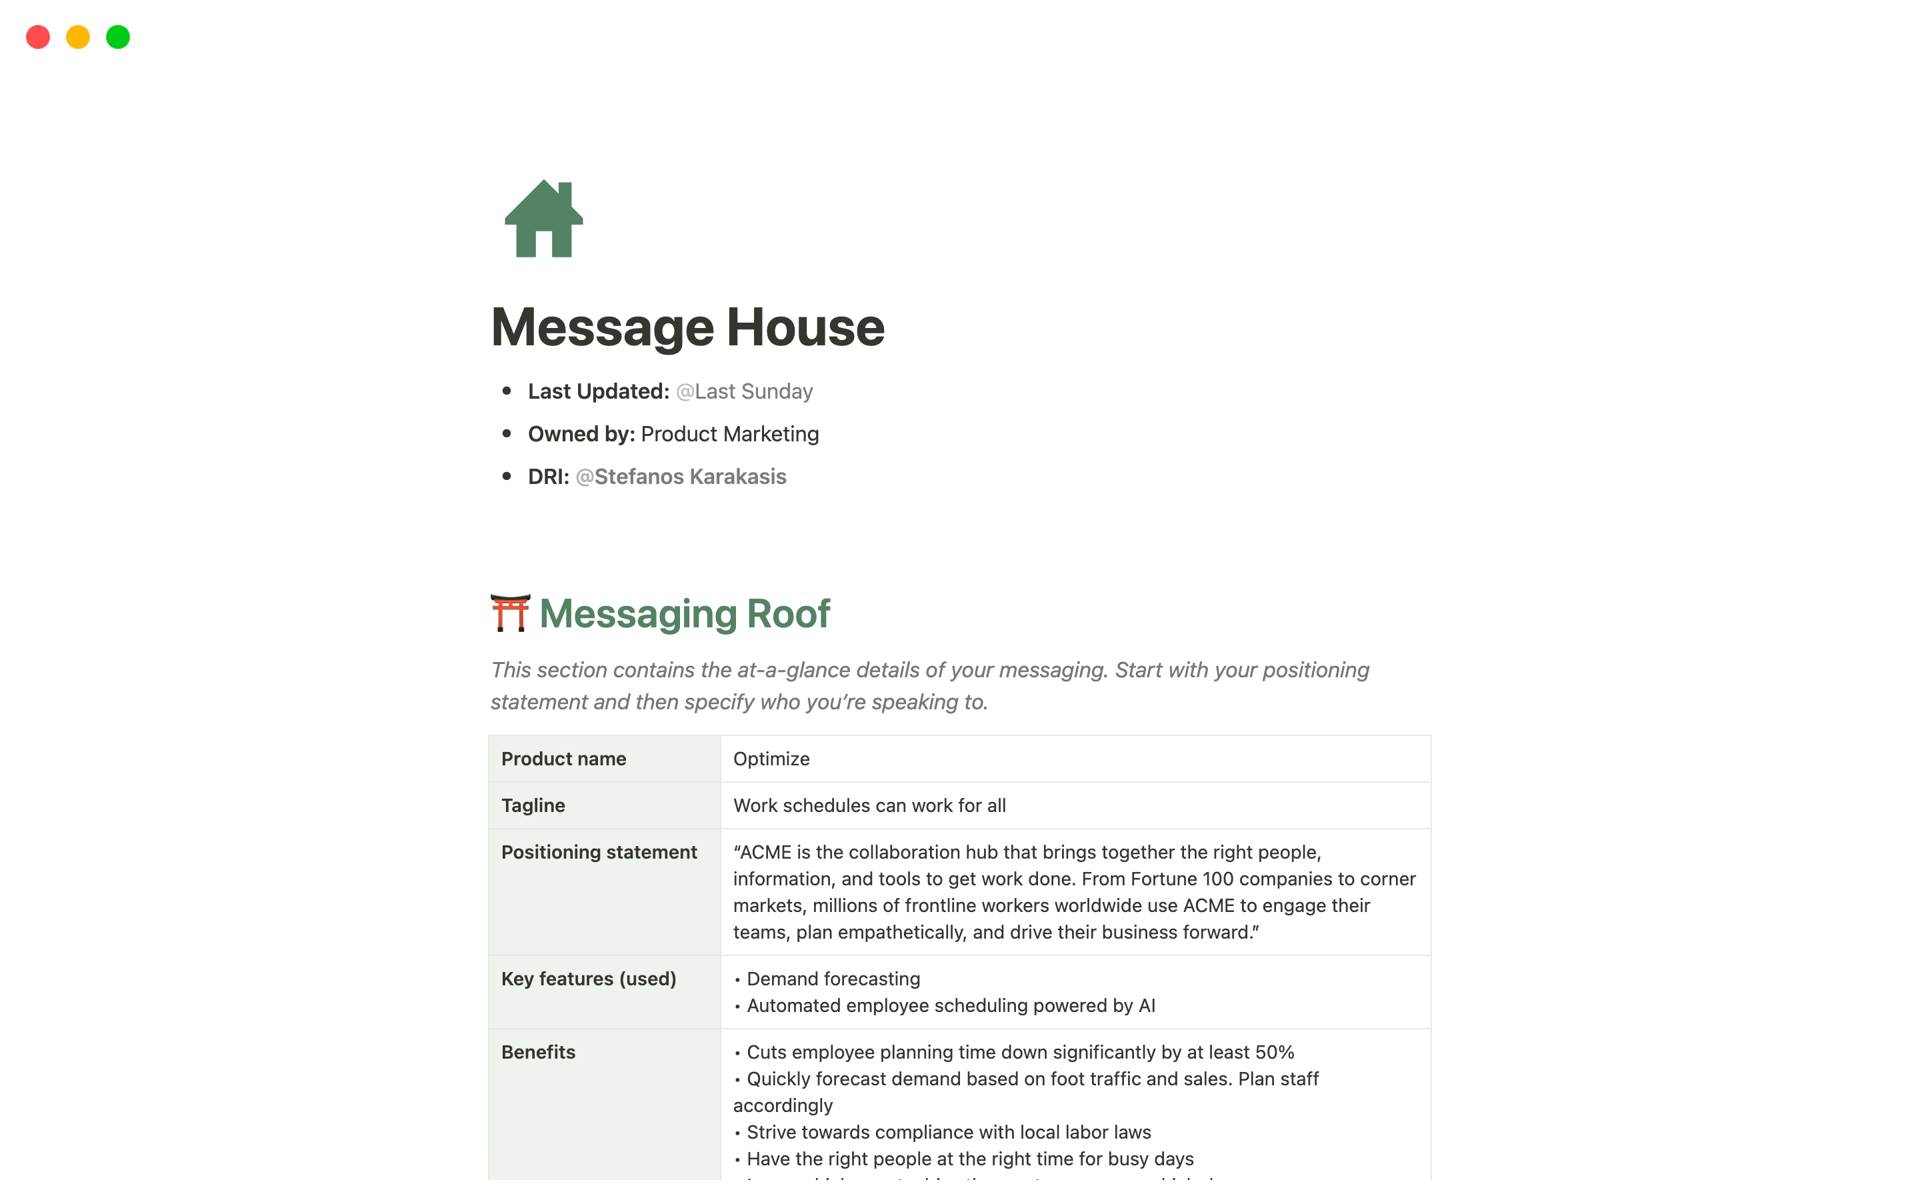 Set up your Message House in Notion to build a framework for your product’s key messaging and help other teams to stay ‘inside the messaging house’.